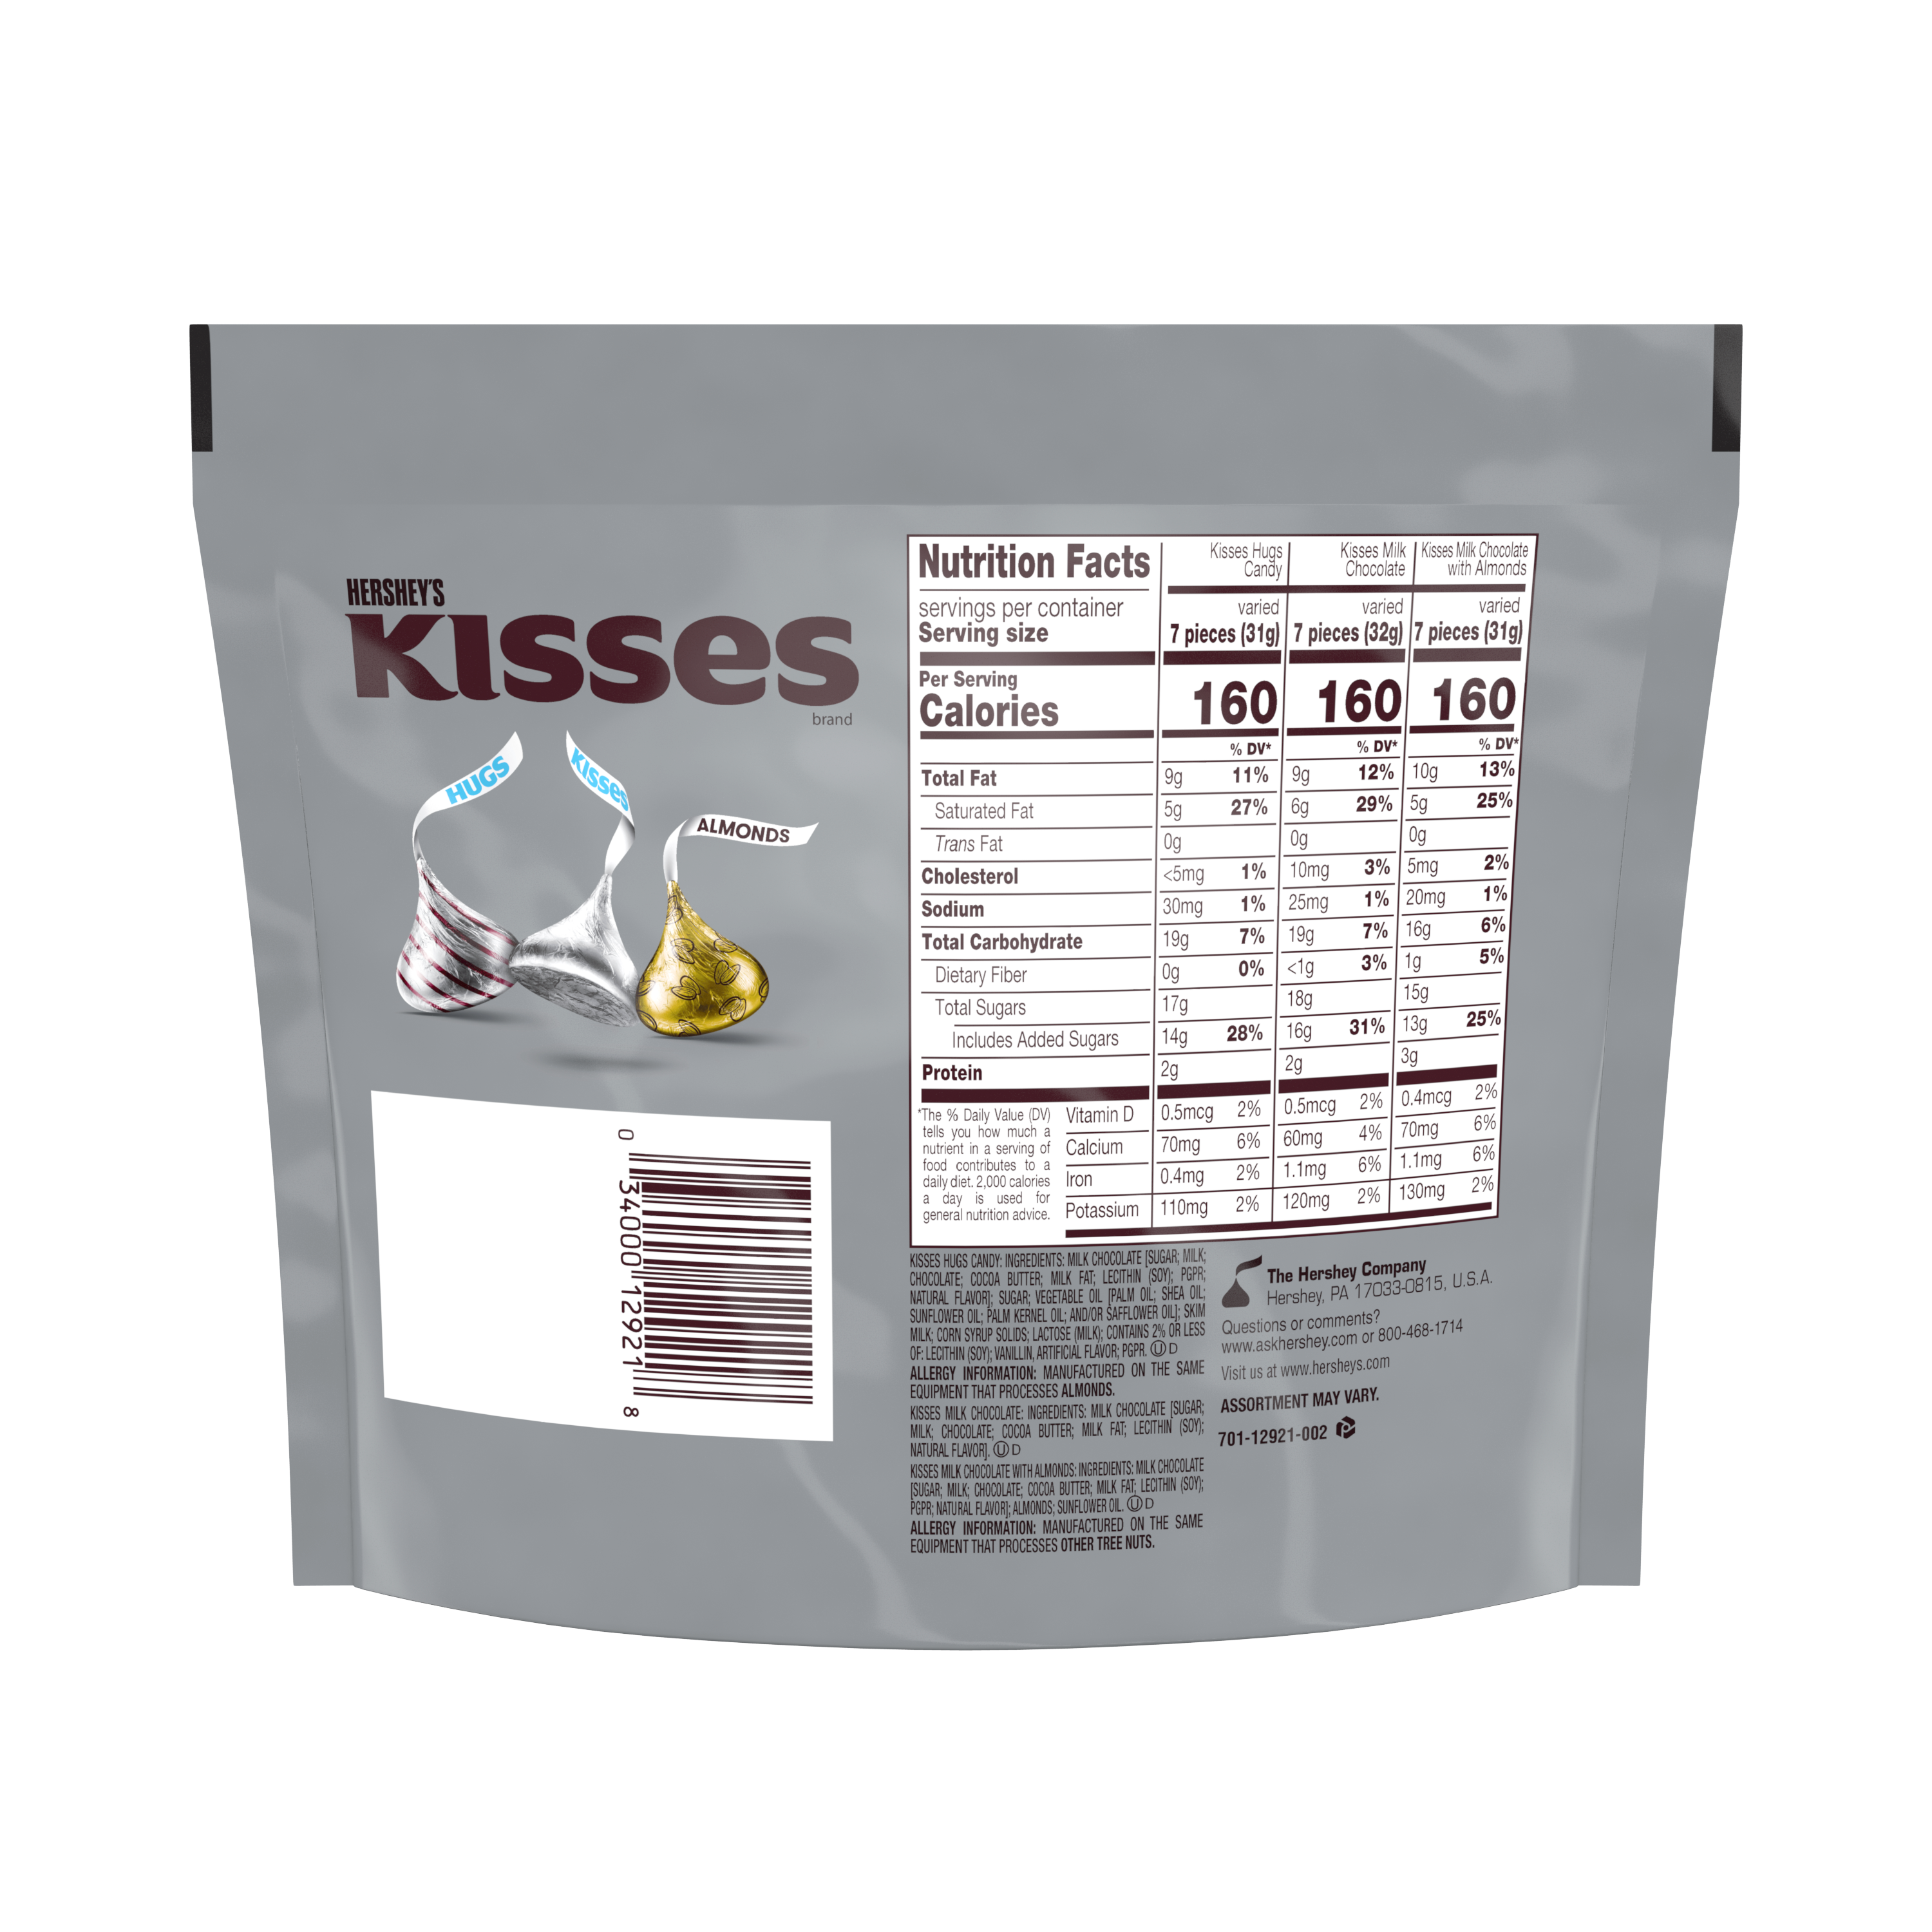 HERSHEY'S KISSES Assortment, 10 oz pack - Back of Package